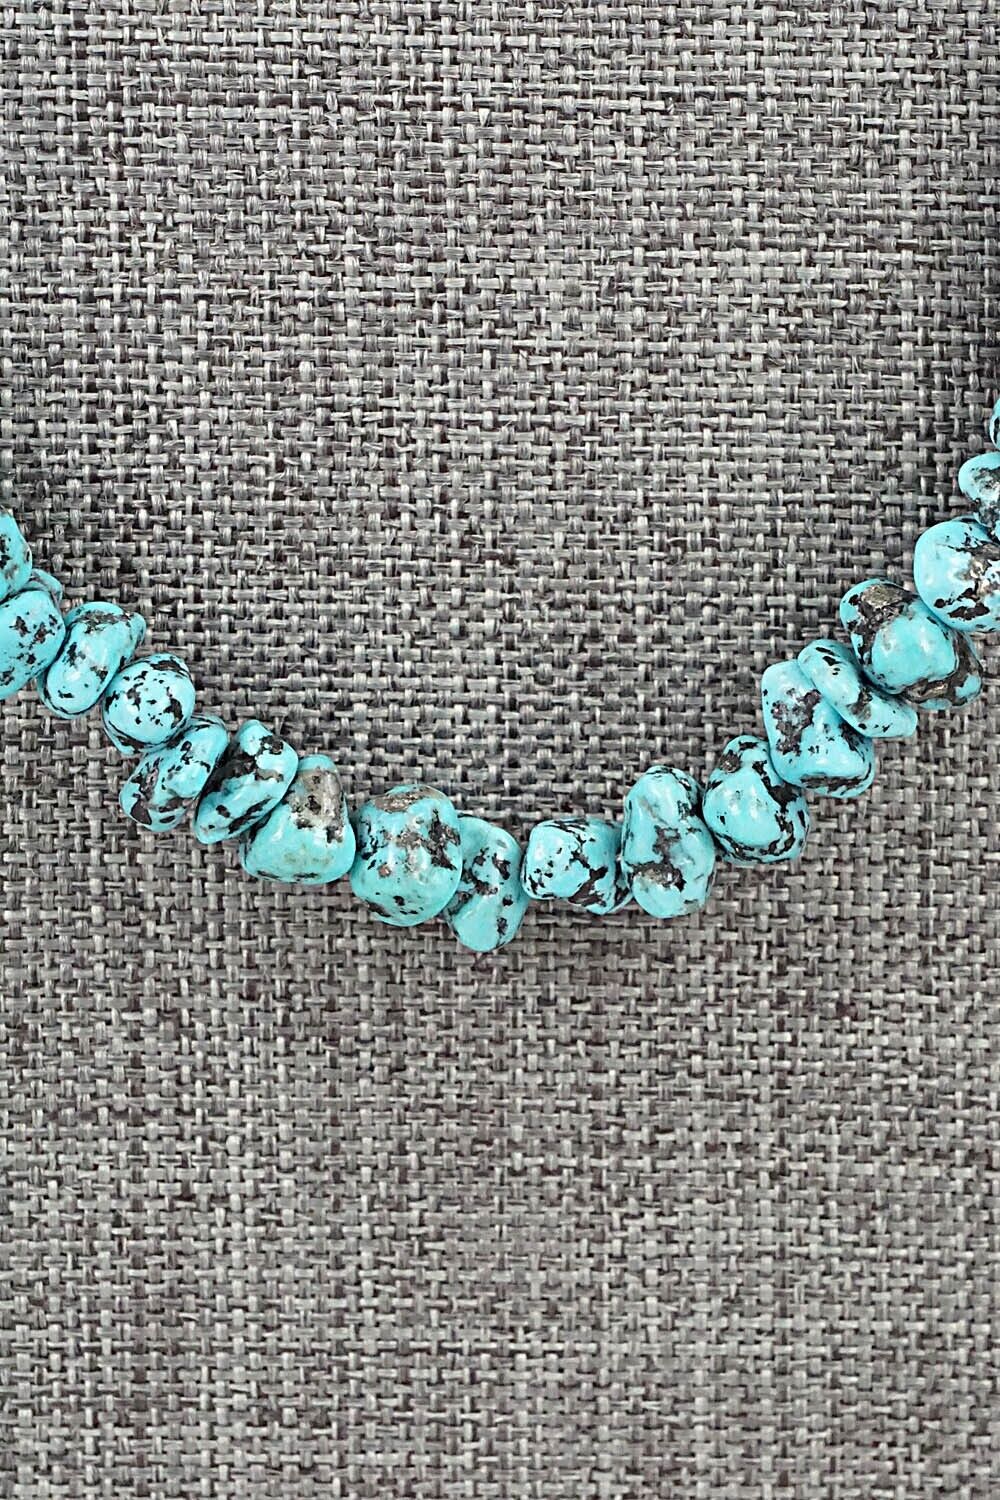 Turquoise & Sterling Silver Necklace 22" - Louise Joe